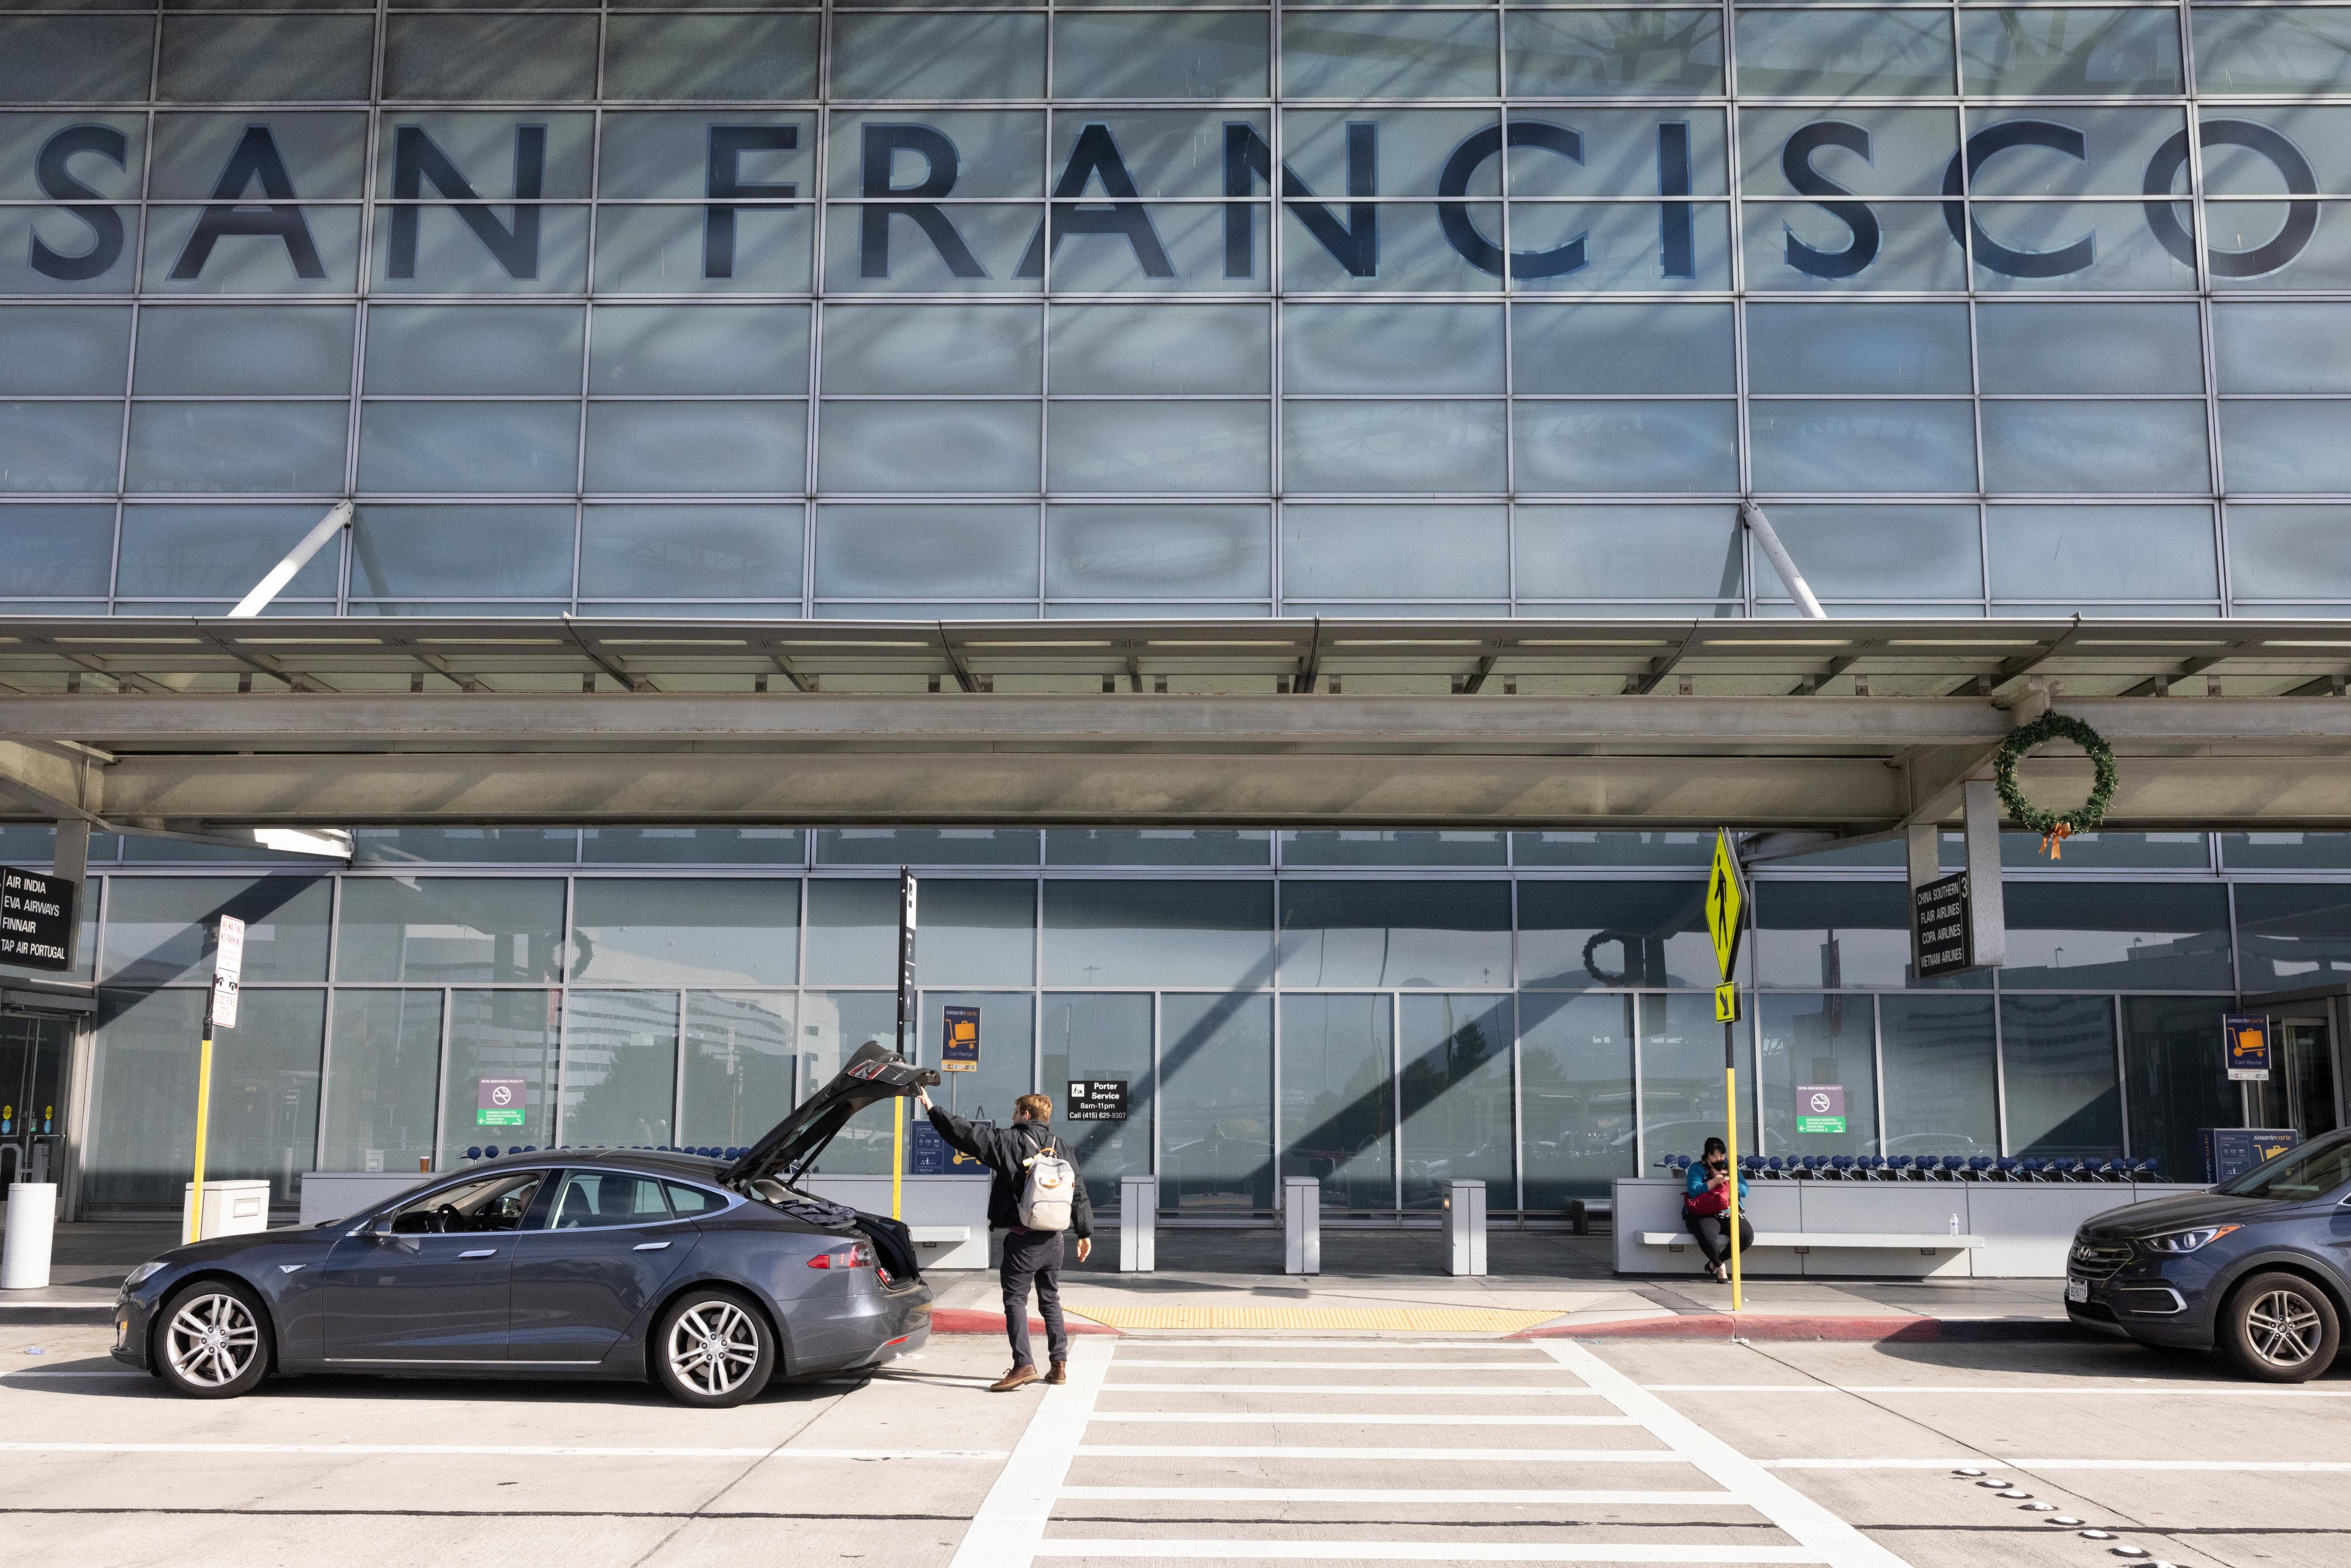 A man loads his luggage into a Tesla at the San Francisco International Airport (SFO) in San Francisco on Tuesday, Nov. 22, 2022.